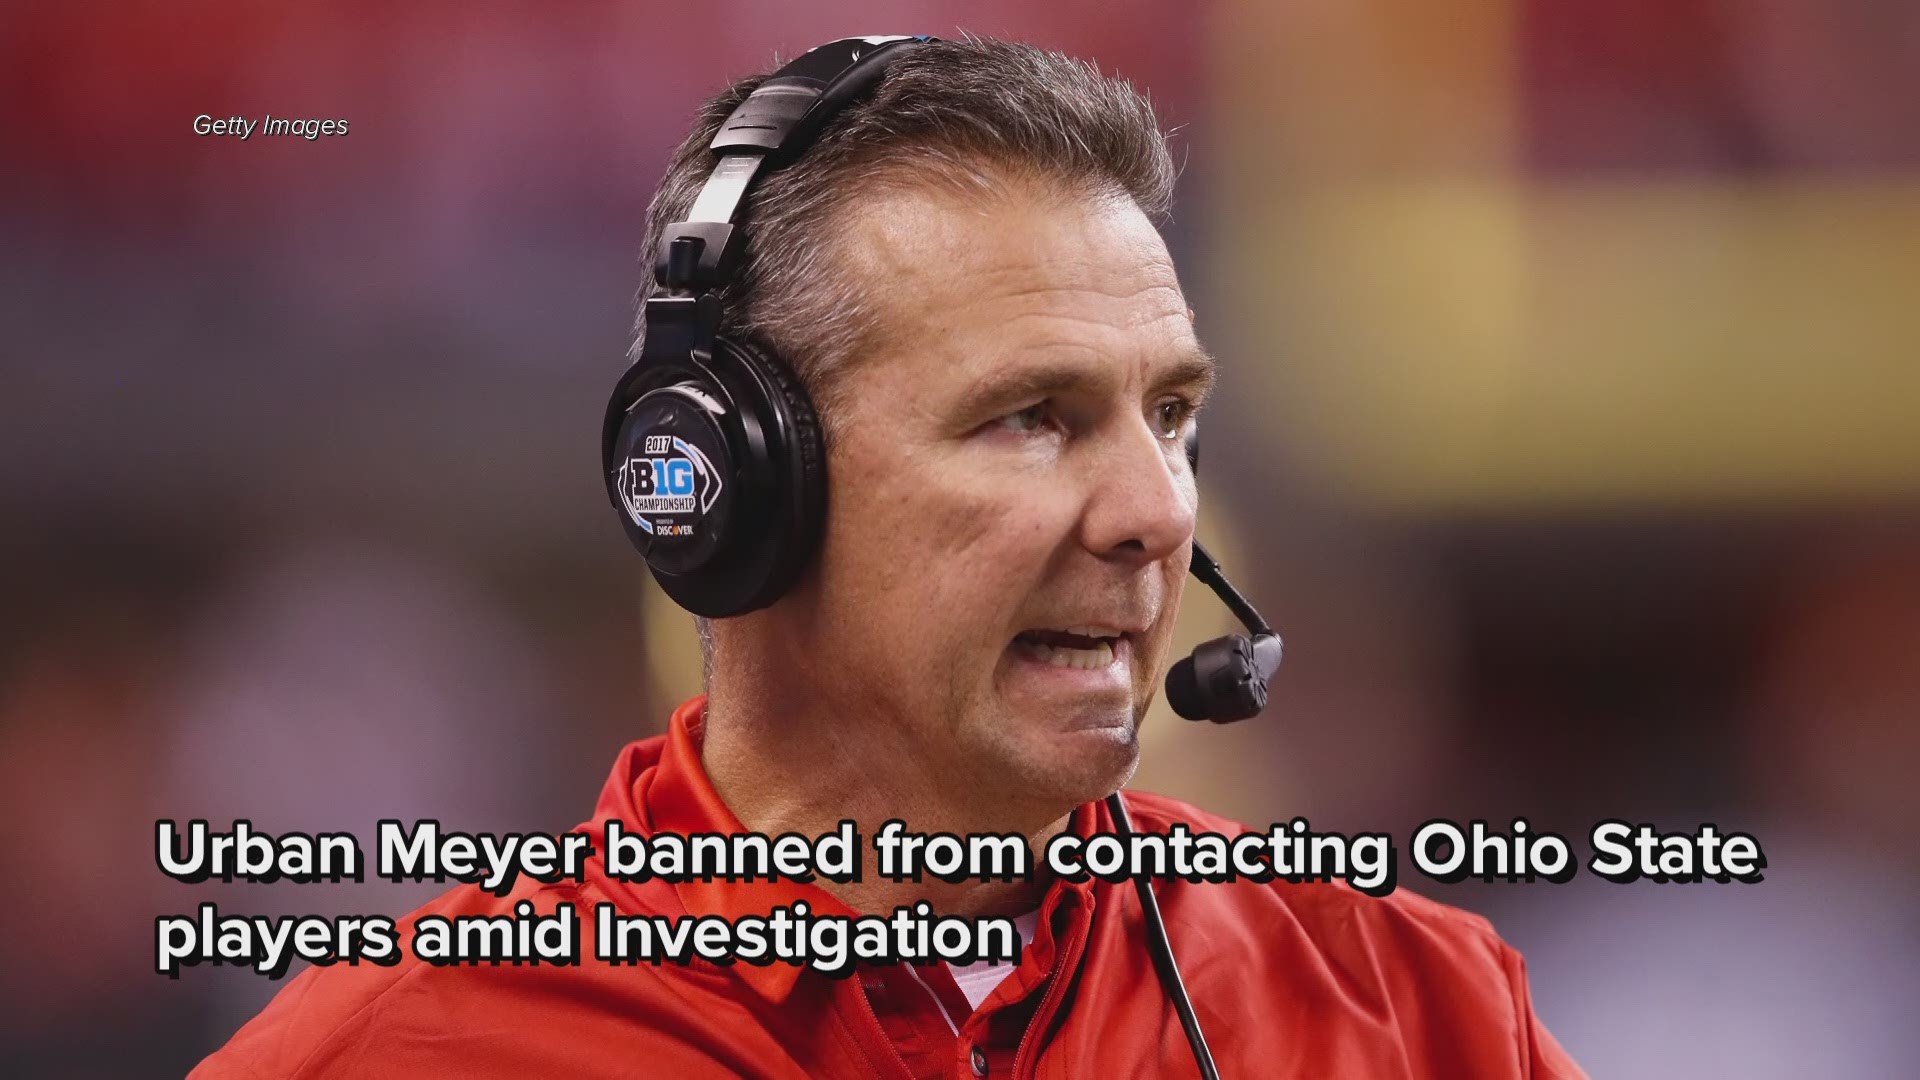 Ex-Ohio State assistant Zach Smith has not been contacted by school's Urban Meyer probe